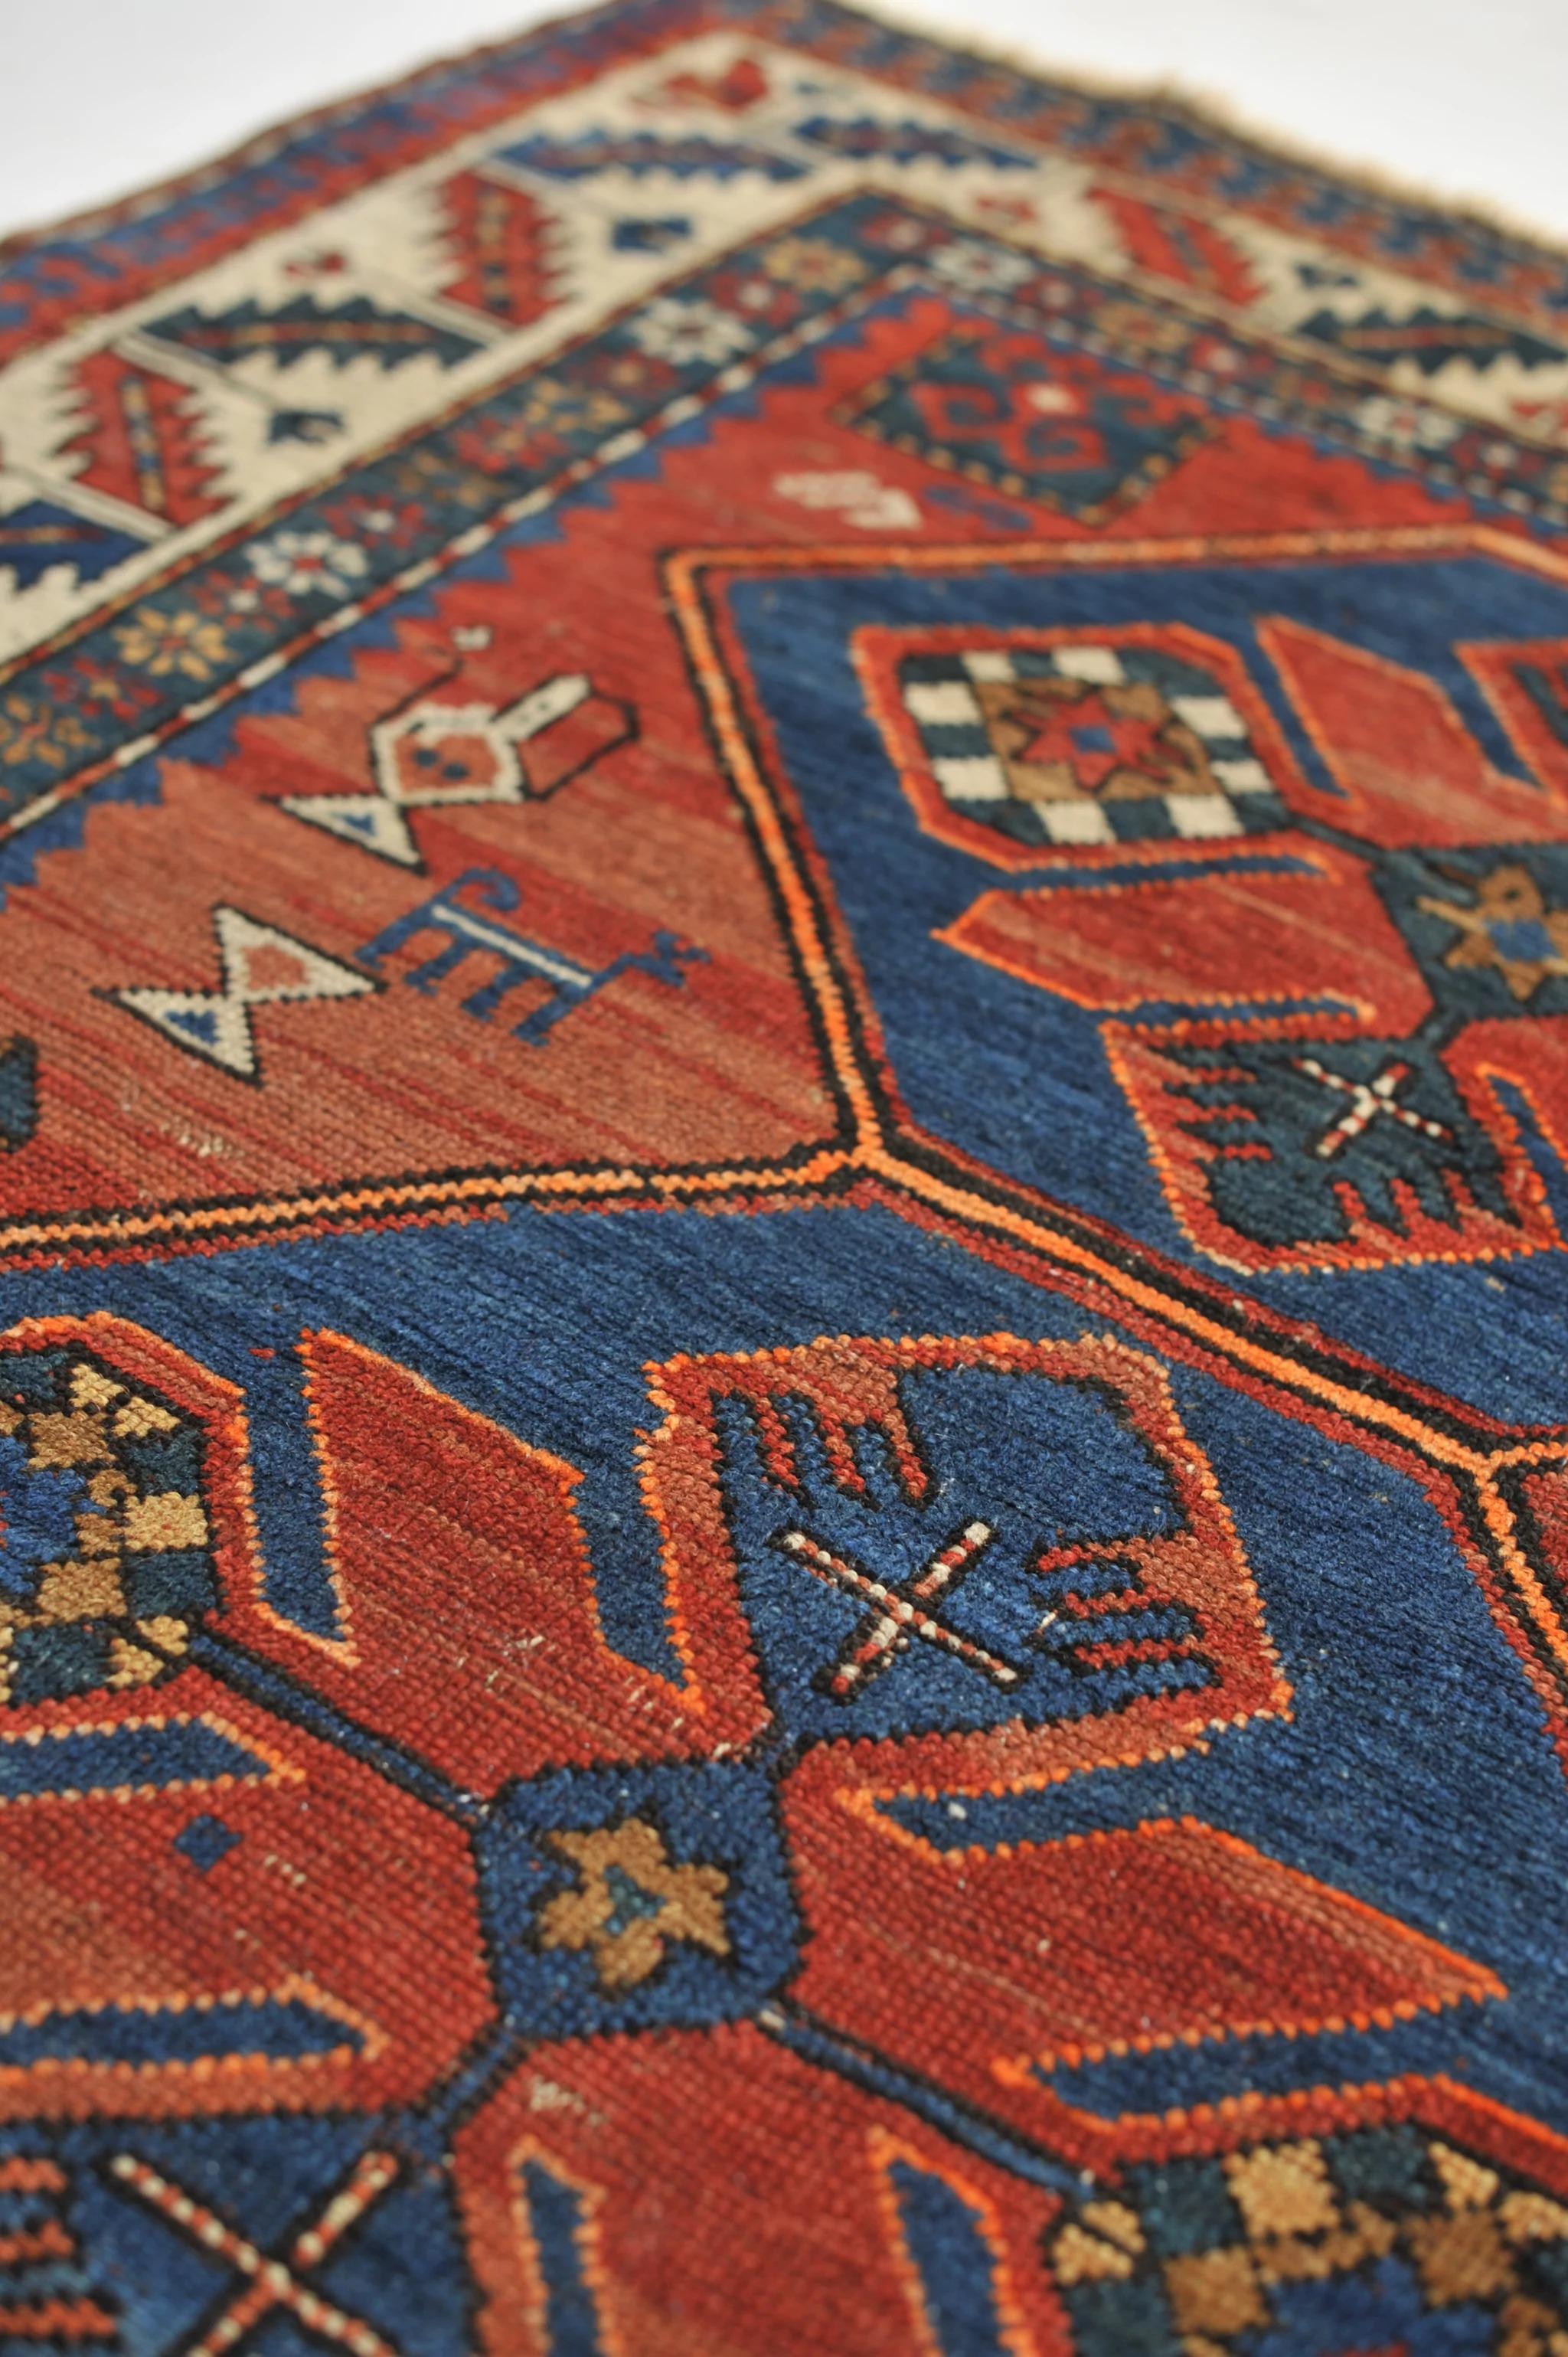 Antique Kazak Tribal Rug with Variations of Clay, Rust, Autumn For Sale 2